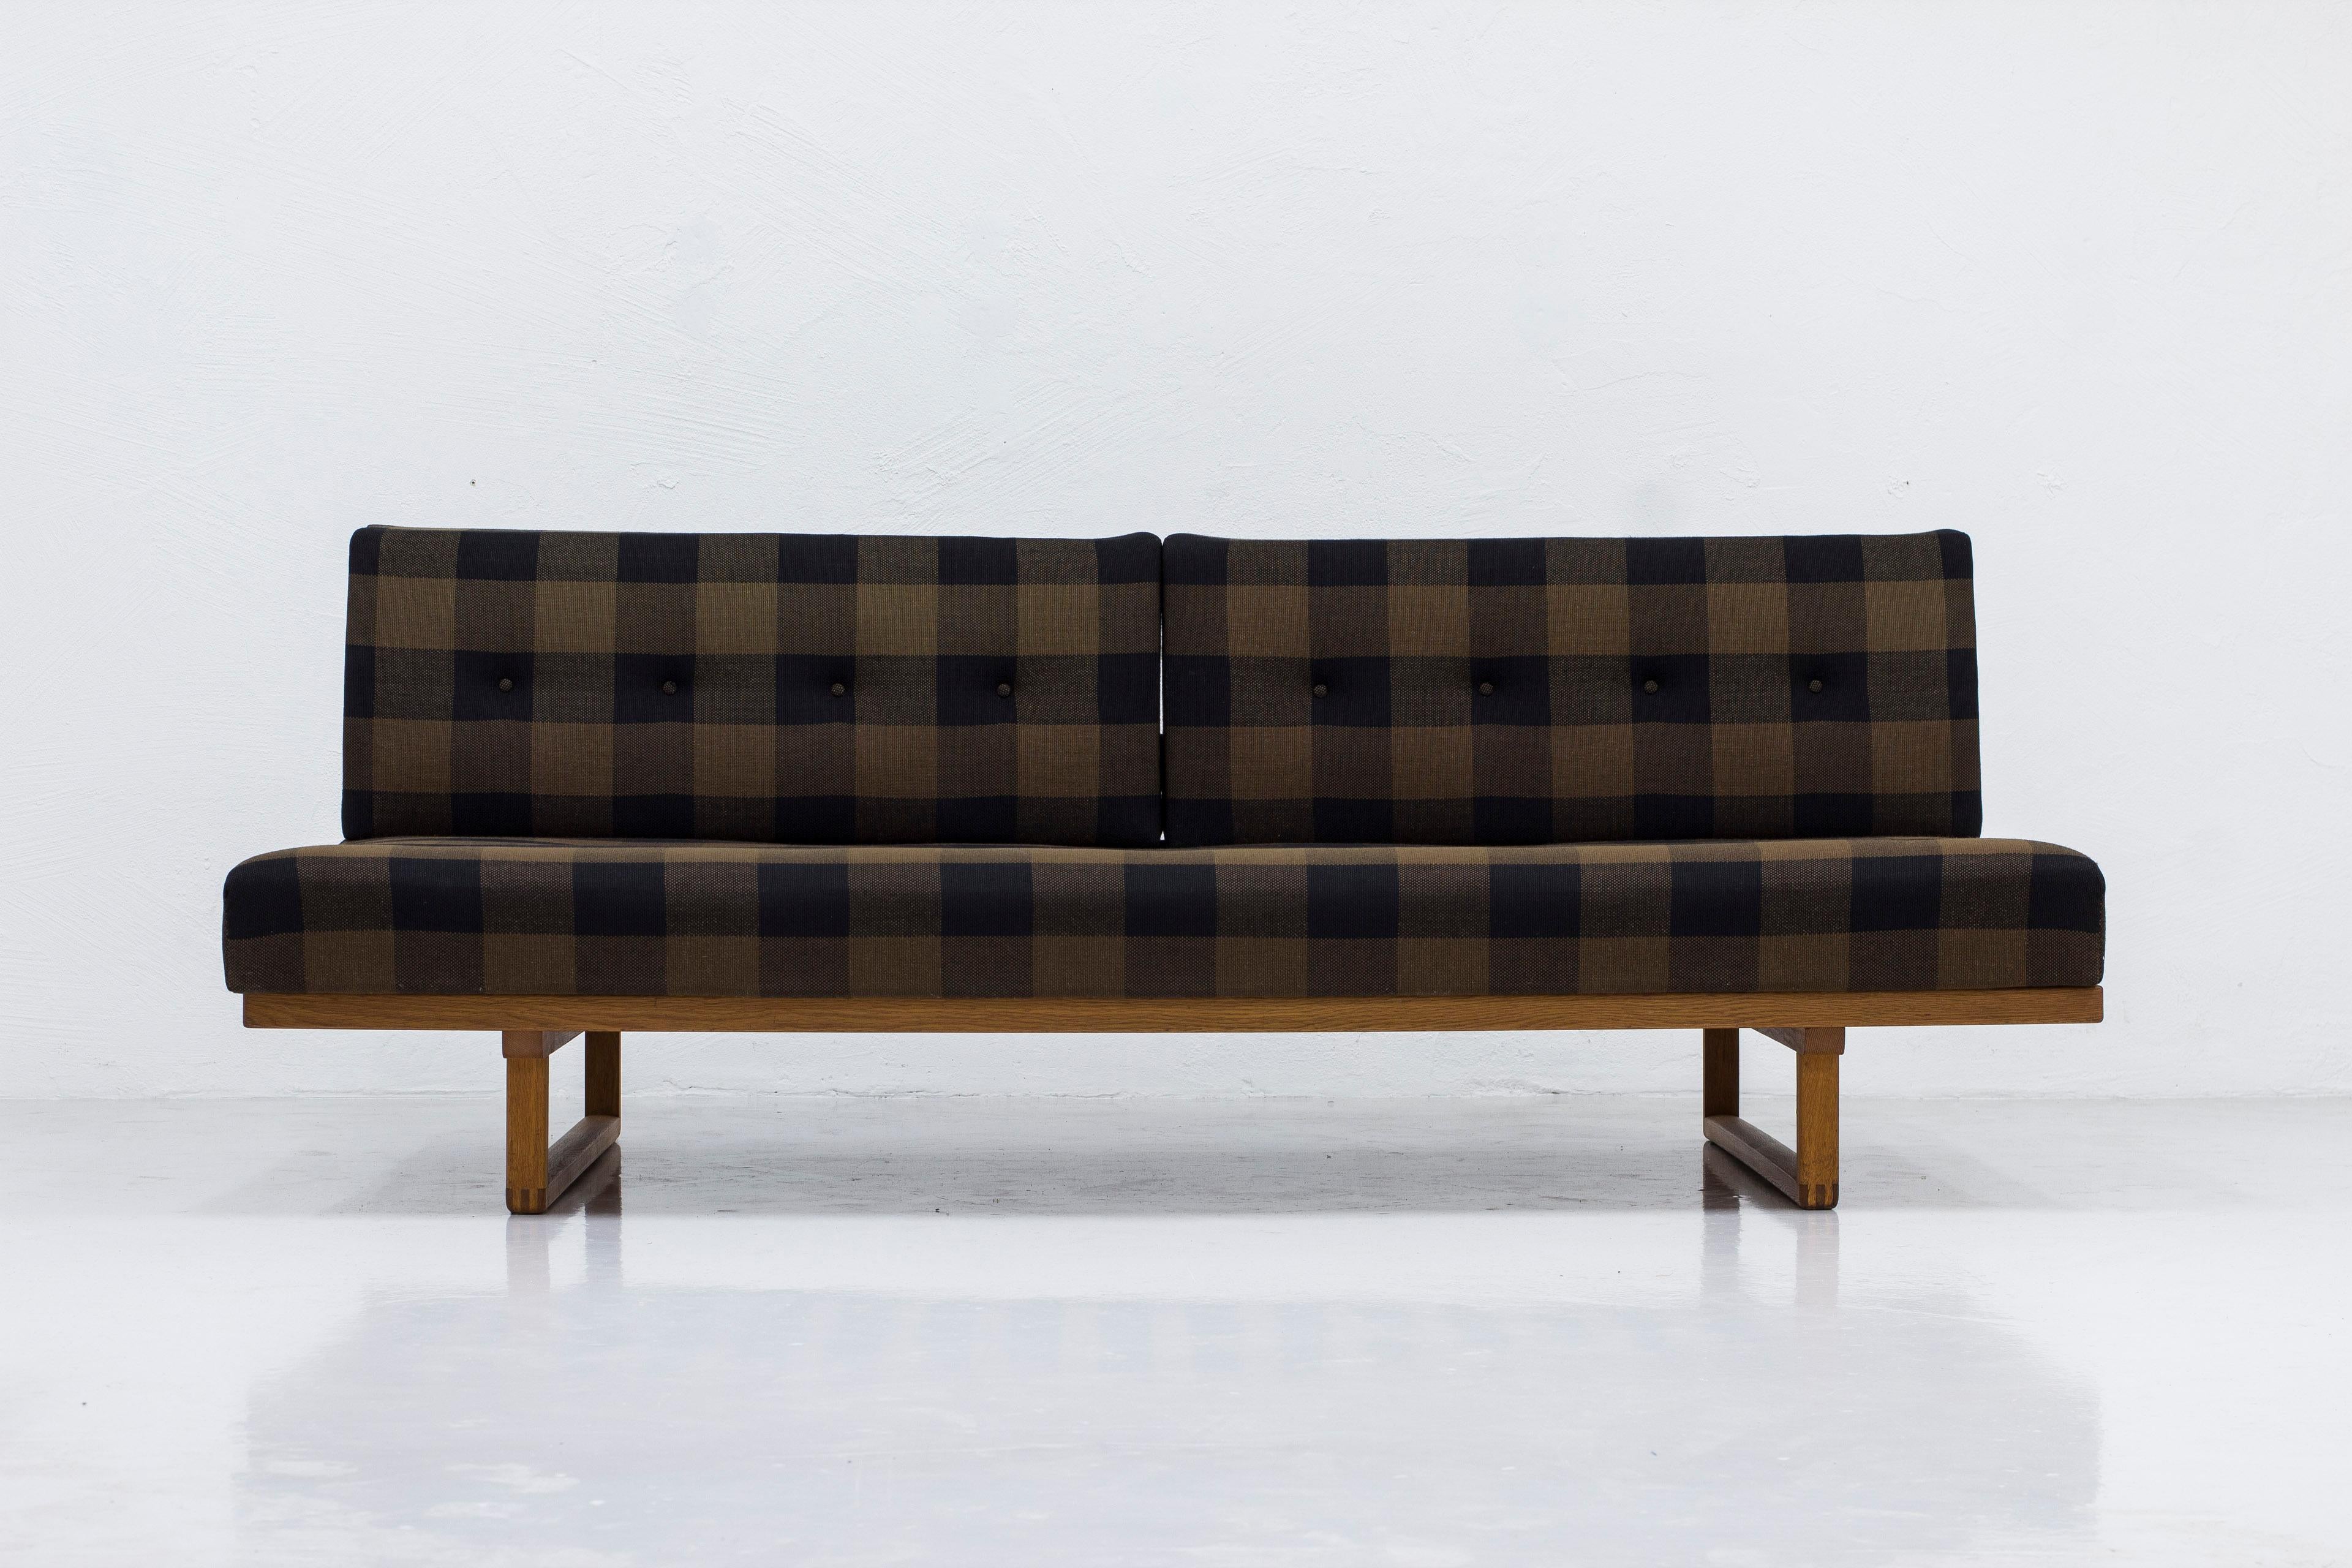 Sofa/daybed in oak and checkered original fabric by Børge Mogensen & Lis Ahlman In Good Condition For Sale In Hägersten, SE